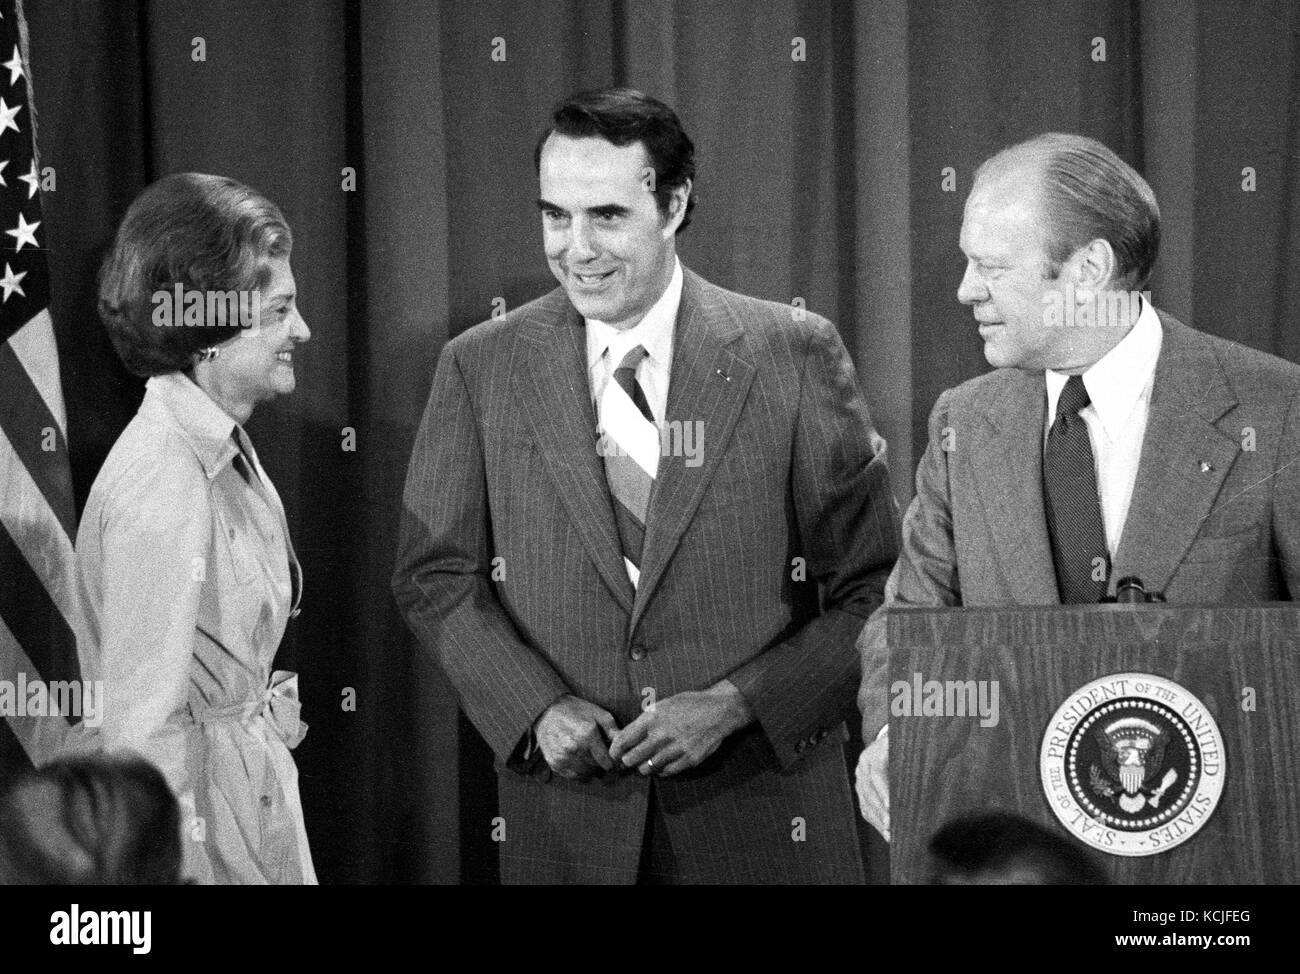 United States President Gerald R. Ford, right, and first lady Betty Ford, left, are photographed with US Senator Bob Dole (Republican of Kansas) in Kansas City, Missouri after the Chief Executive named him as his running mate in the 1976 Presidential election on August 18, 1976.  Both men will be running on the Republican ticket. Credit: Arnie Sachs / CNP /MediaPunch Stock Photo